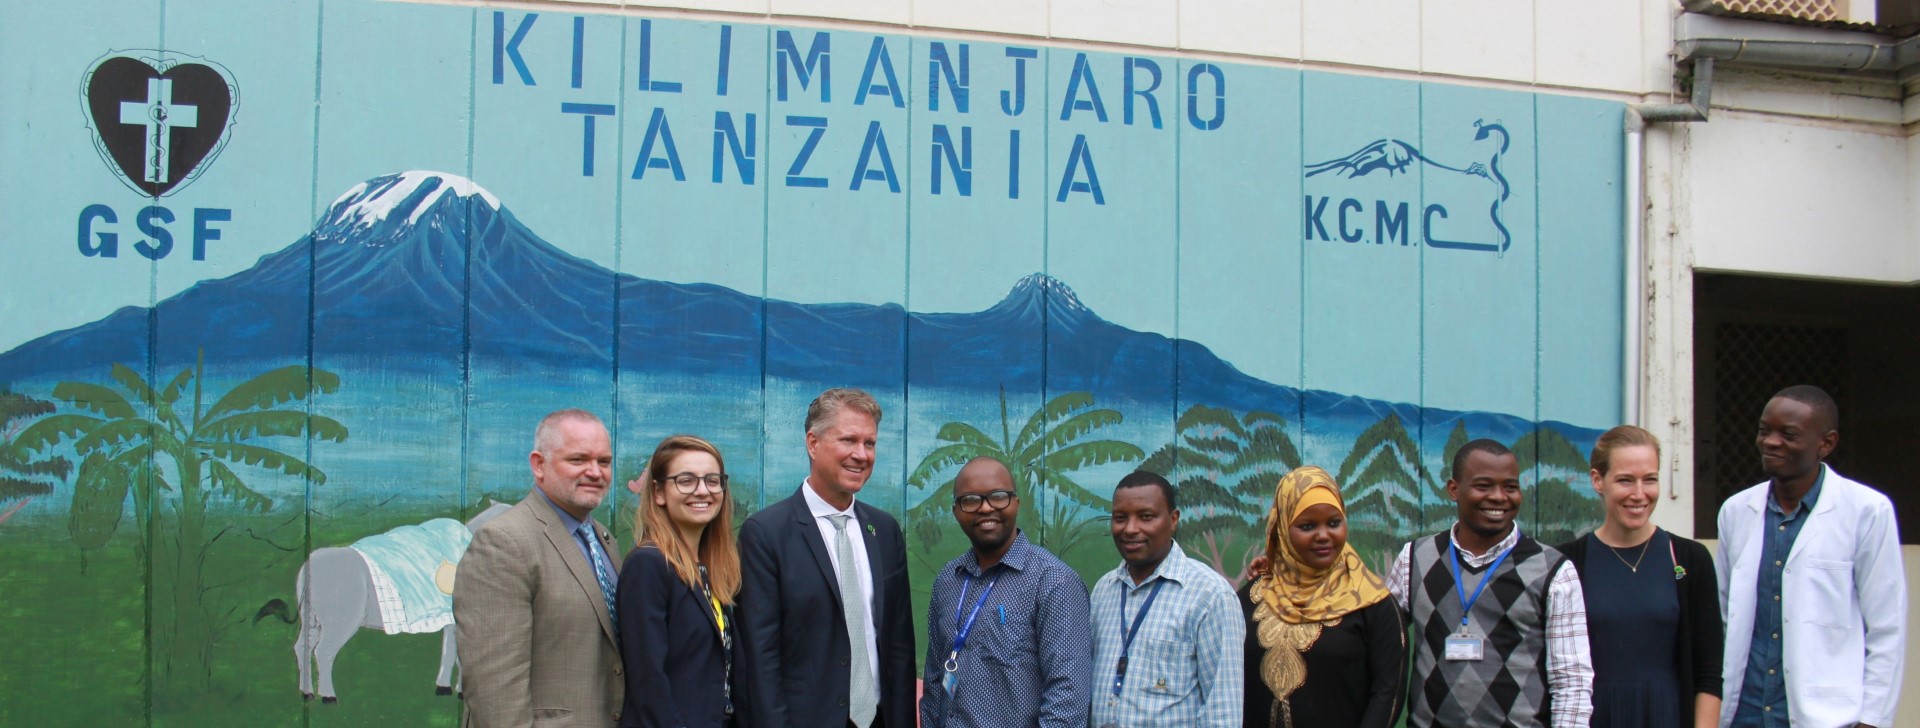 People standing in front of a wall mural that says Kilimanjaro Tanzanie, GSF, KCMC